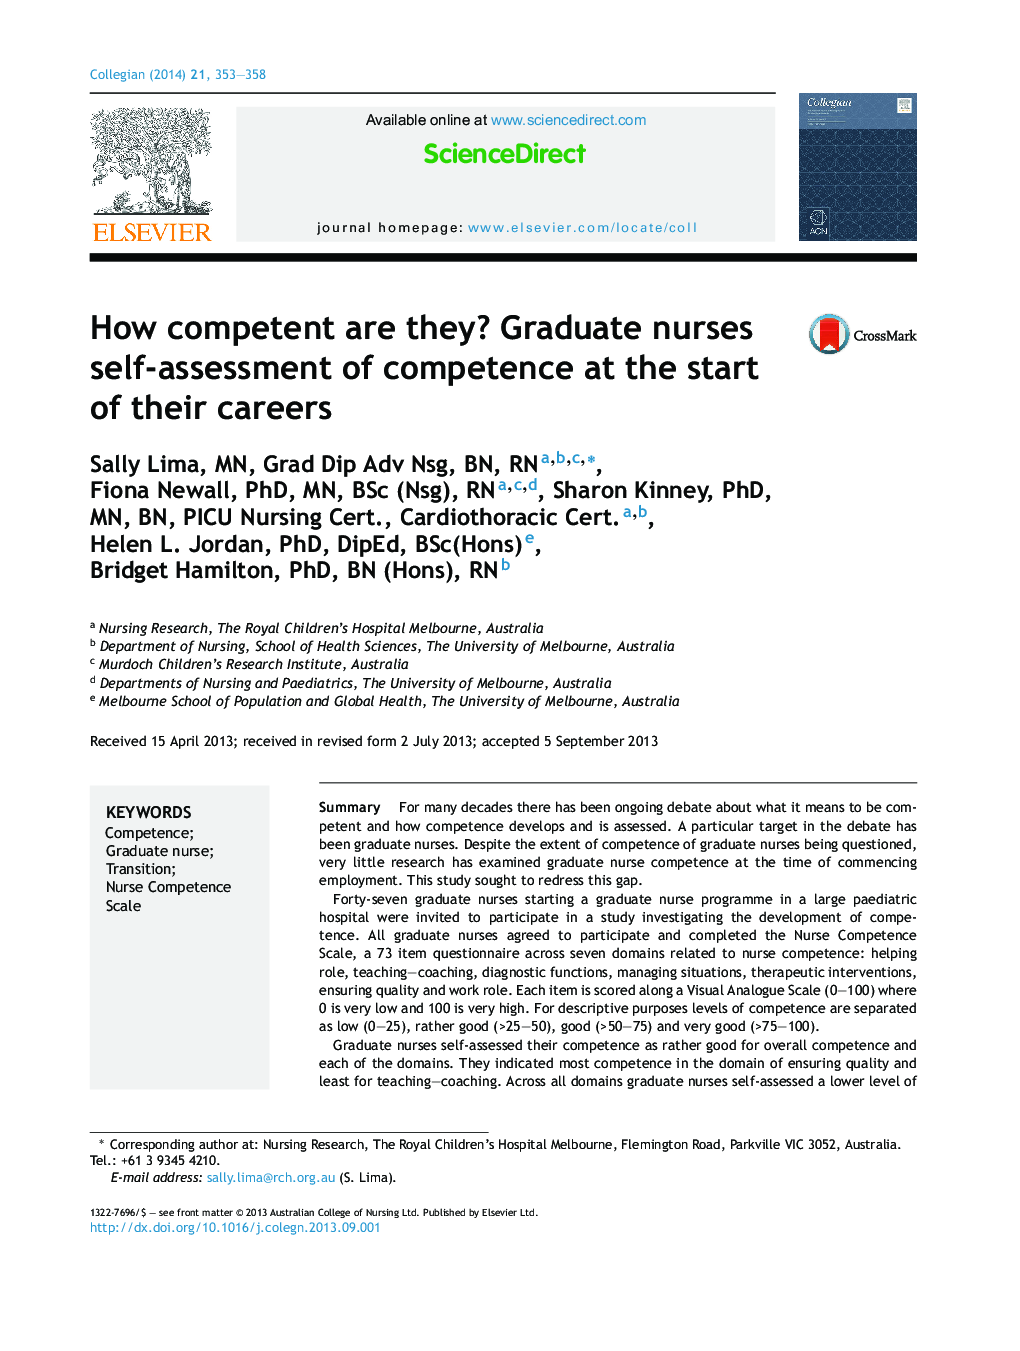 How competent are they? Graduate nurses self-assessment of competence at the start of their careers